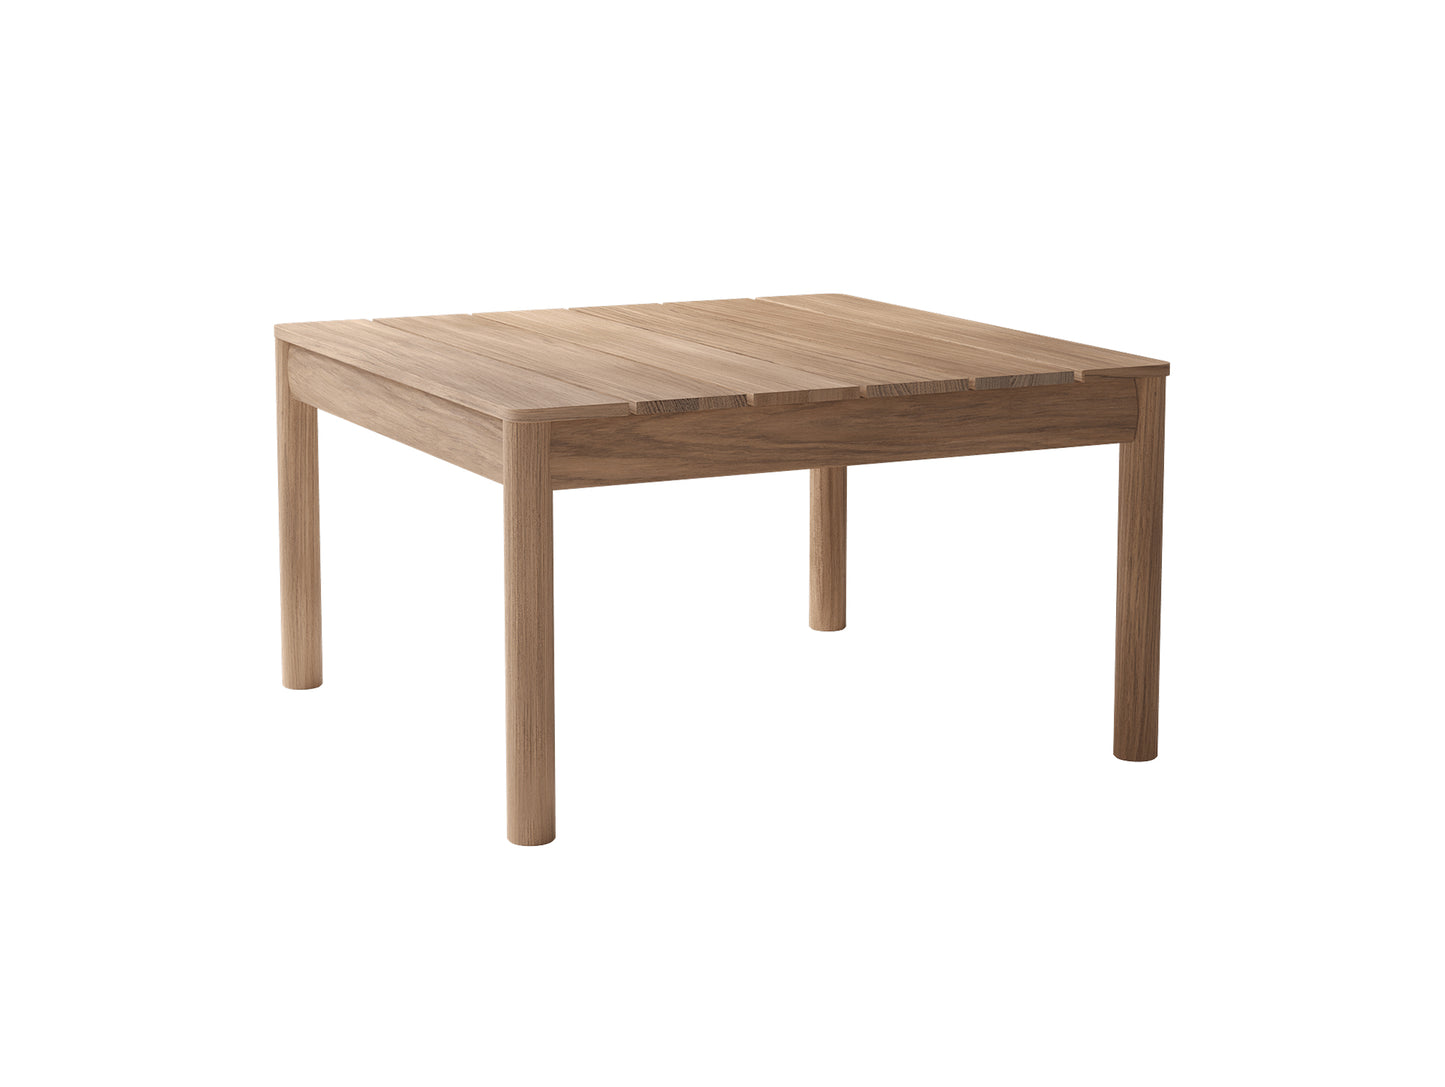 Tradition Outdoor Lounge Table by Fritz Hansen - High